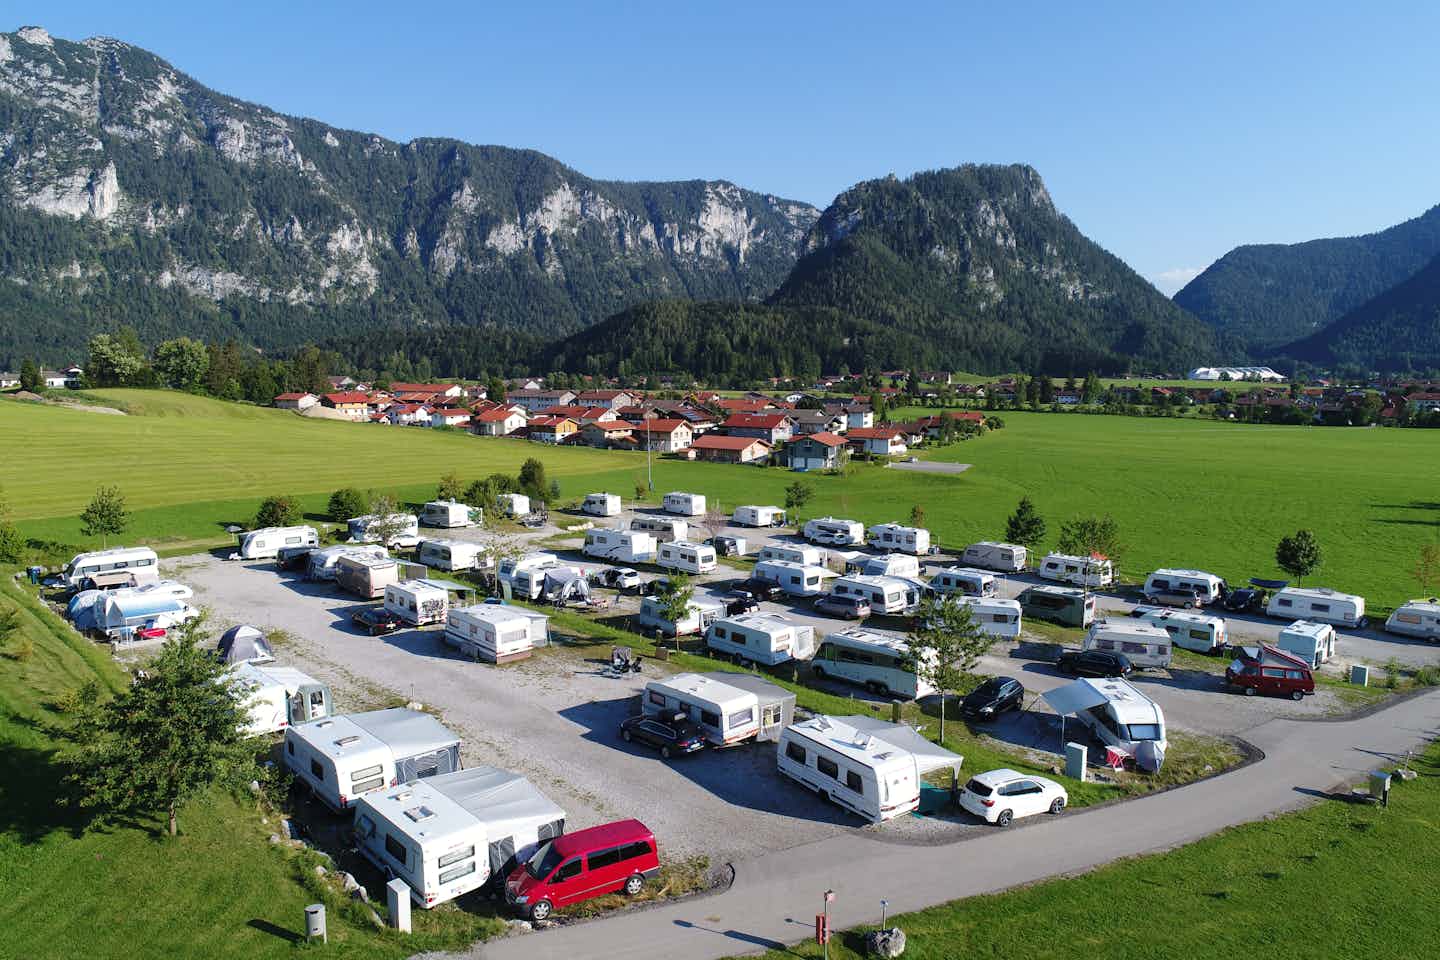 Camping Lindlbauer